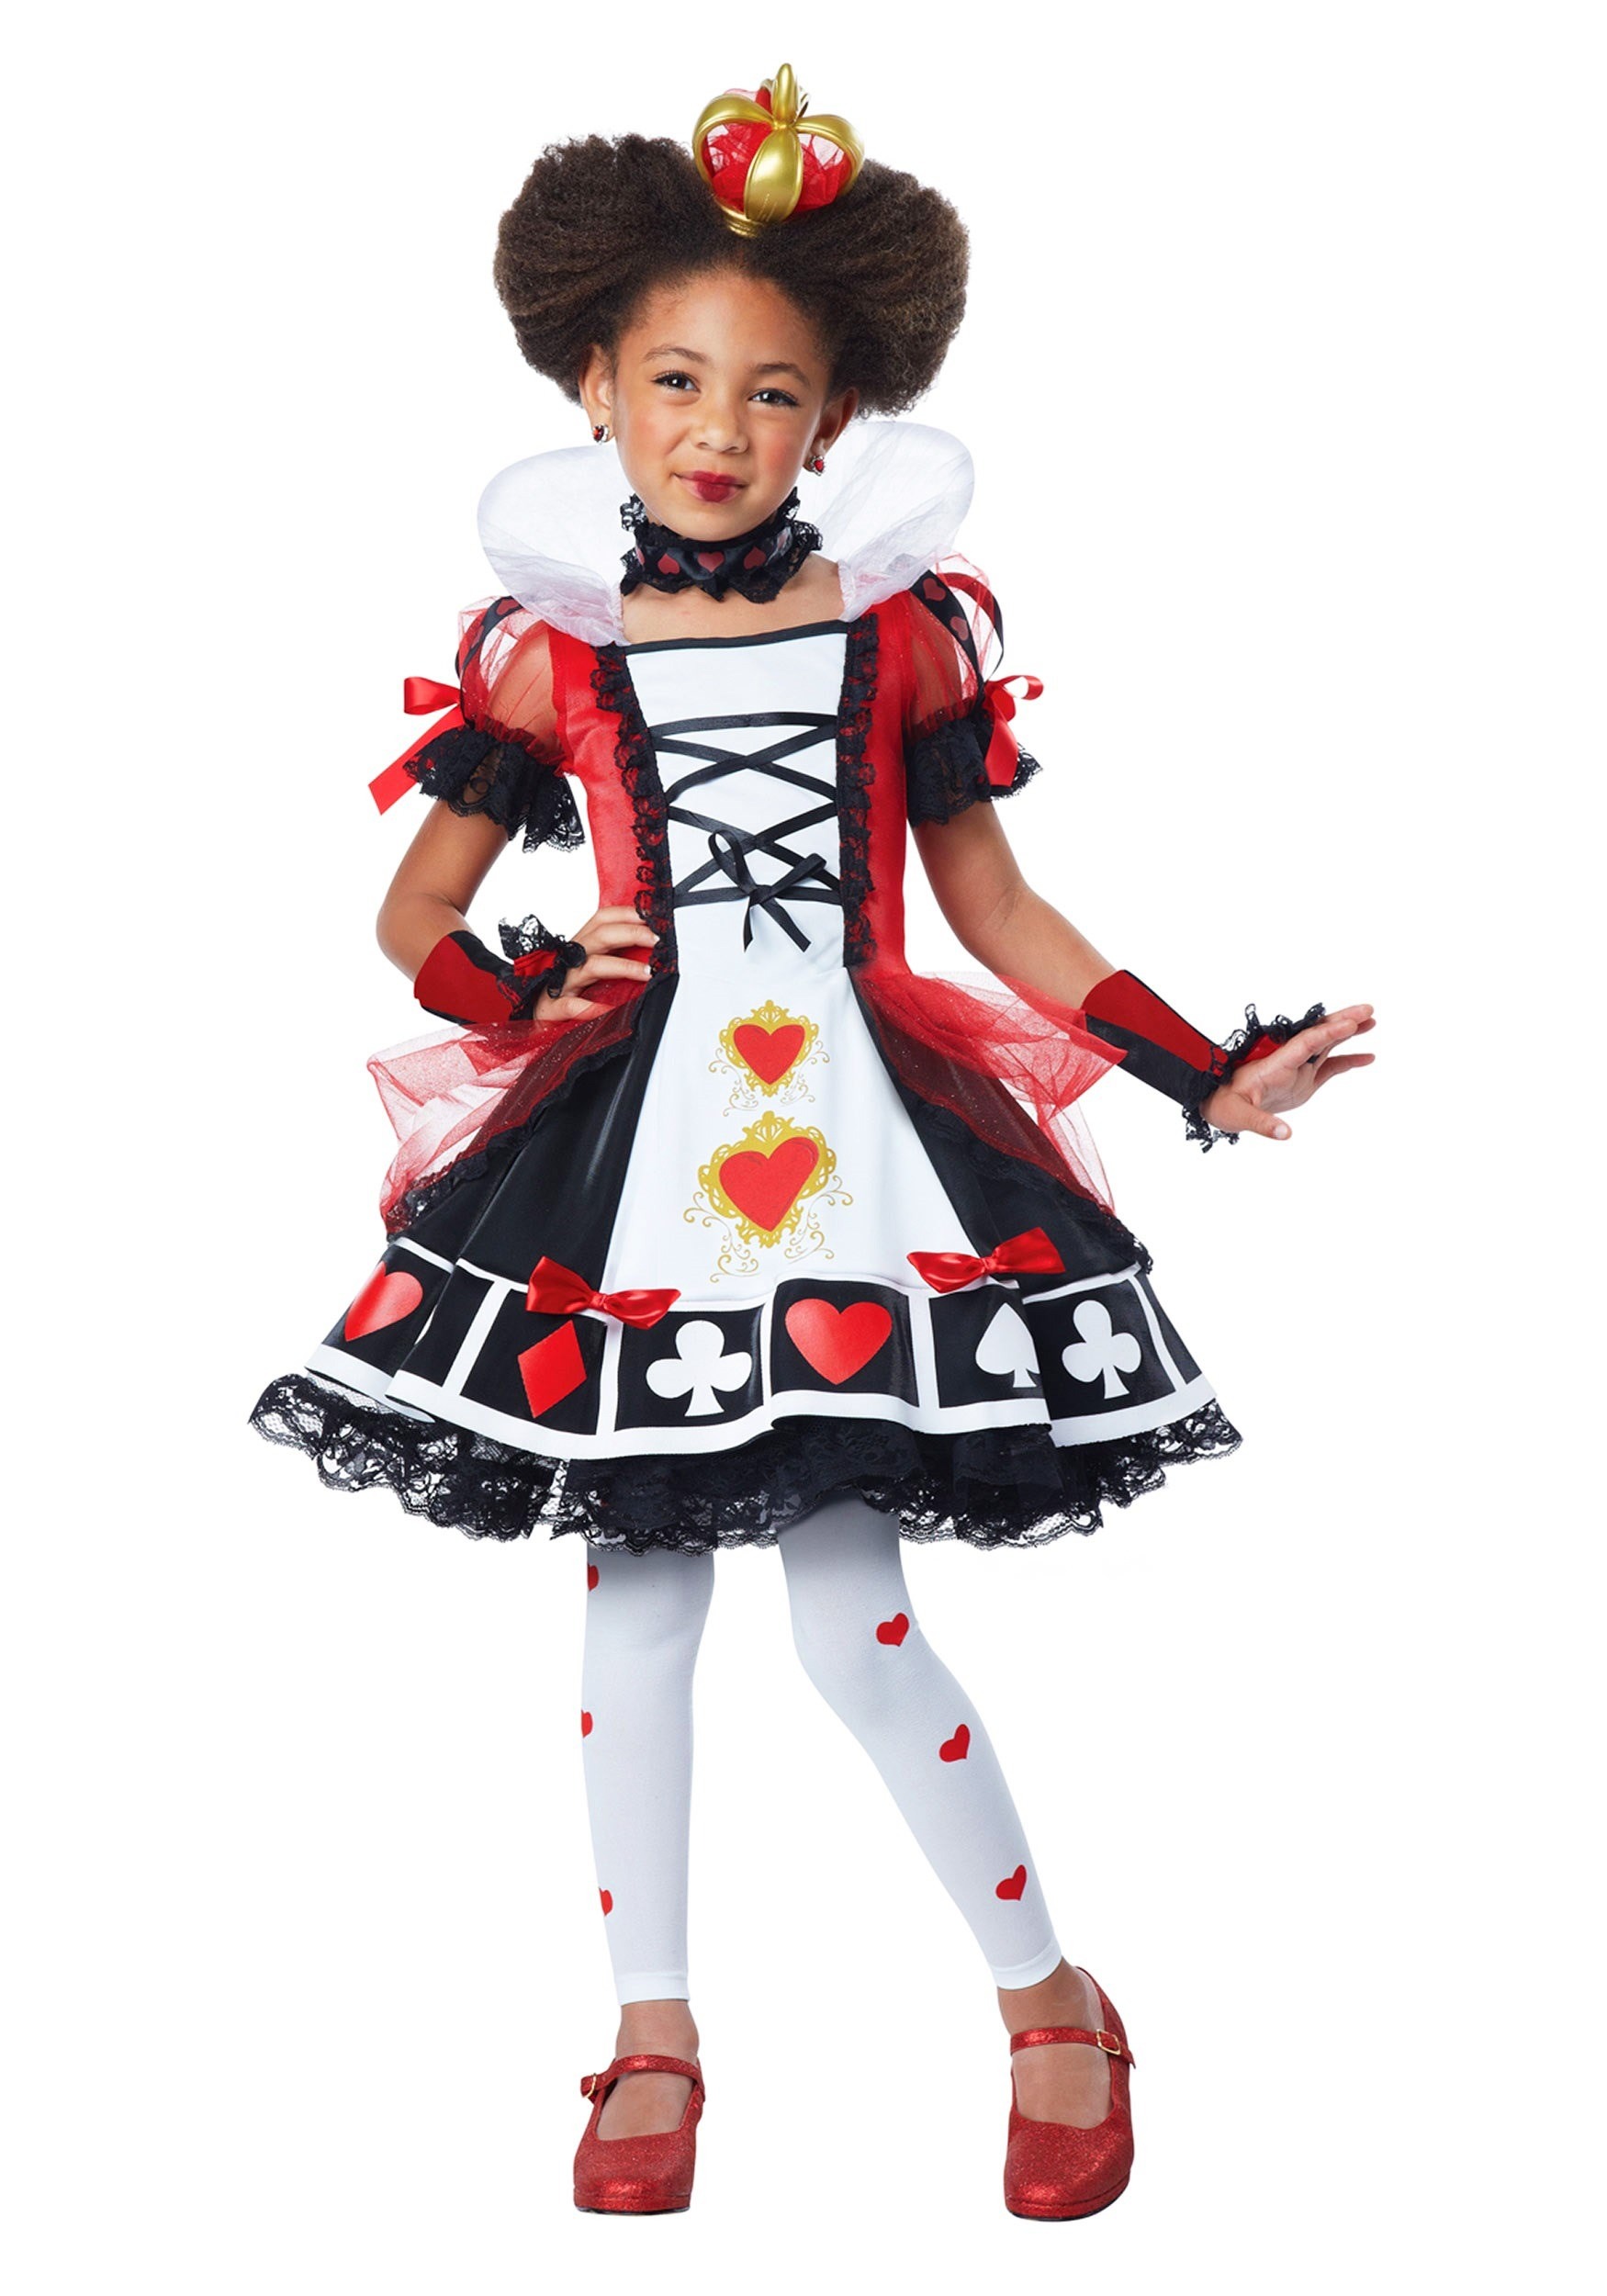 Photos - Fancy Dress California Costume Collection Deluxe Queen of Hearts Costume for Girls Bla 